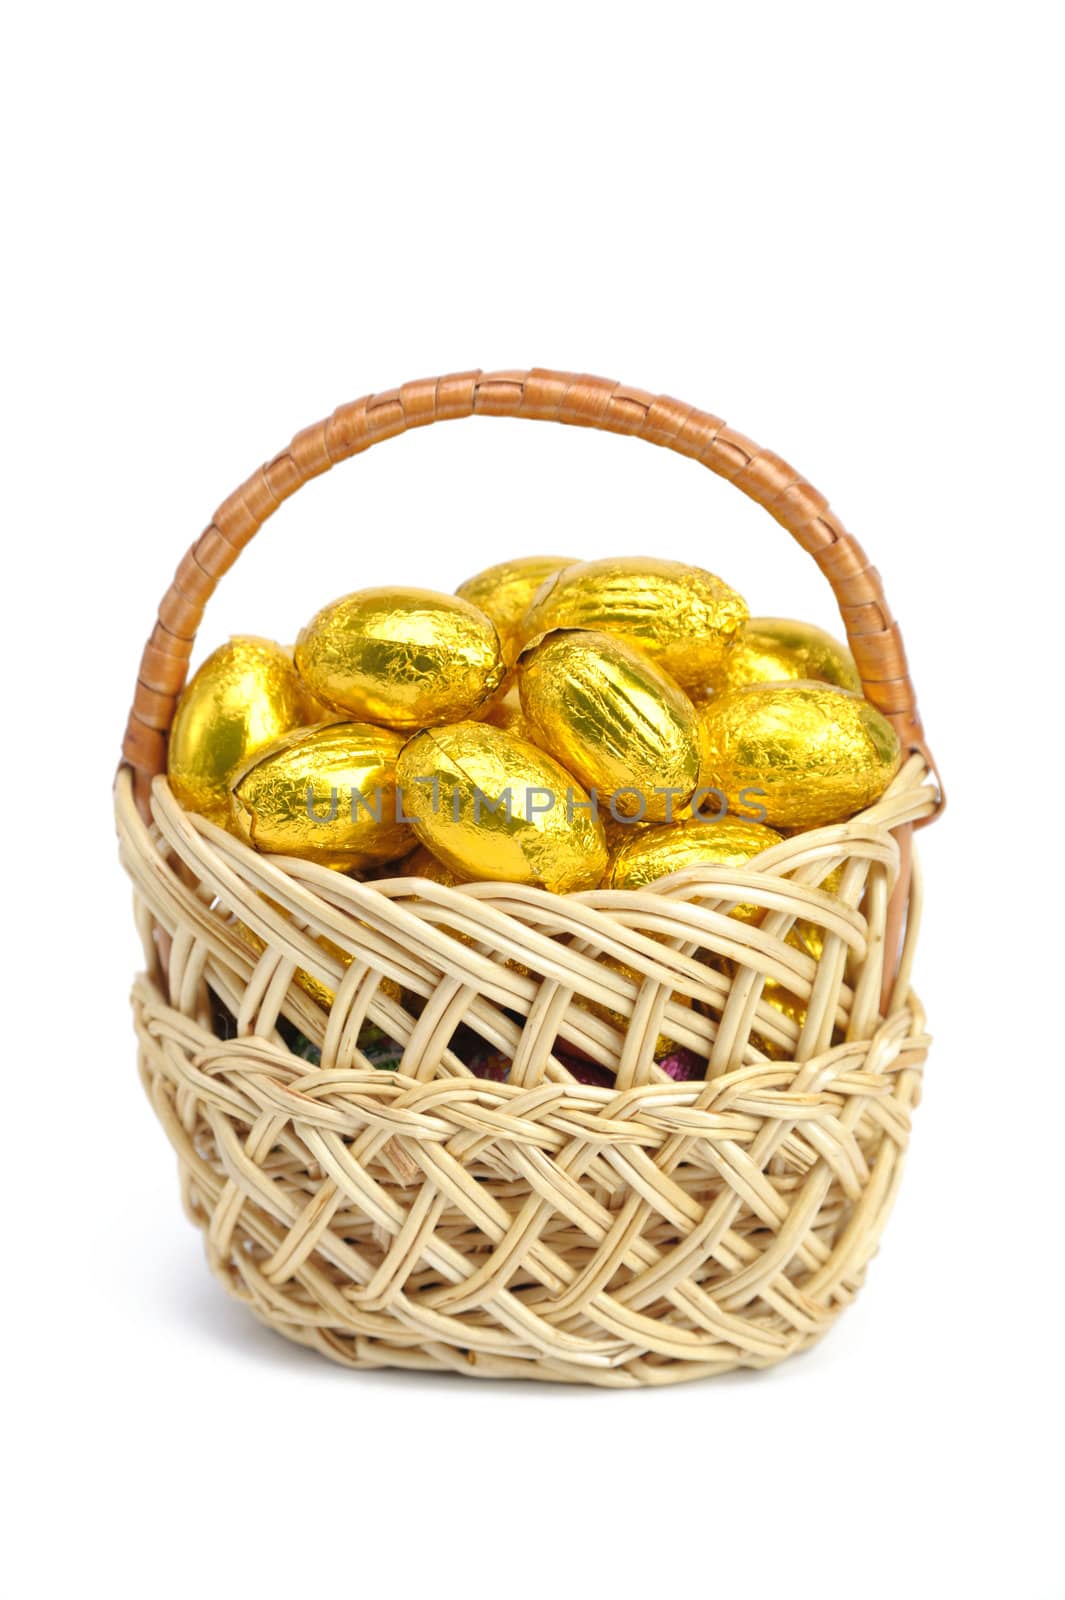 An image of golden eggs in a basket